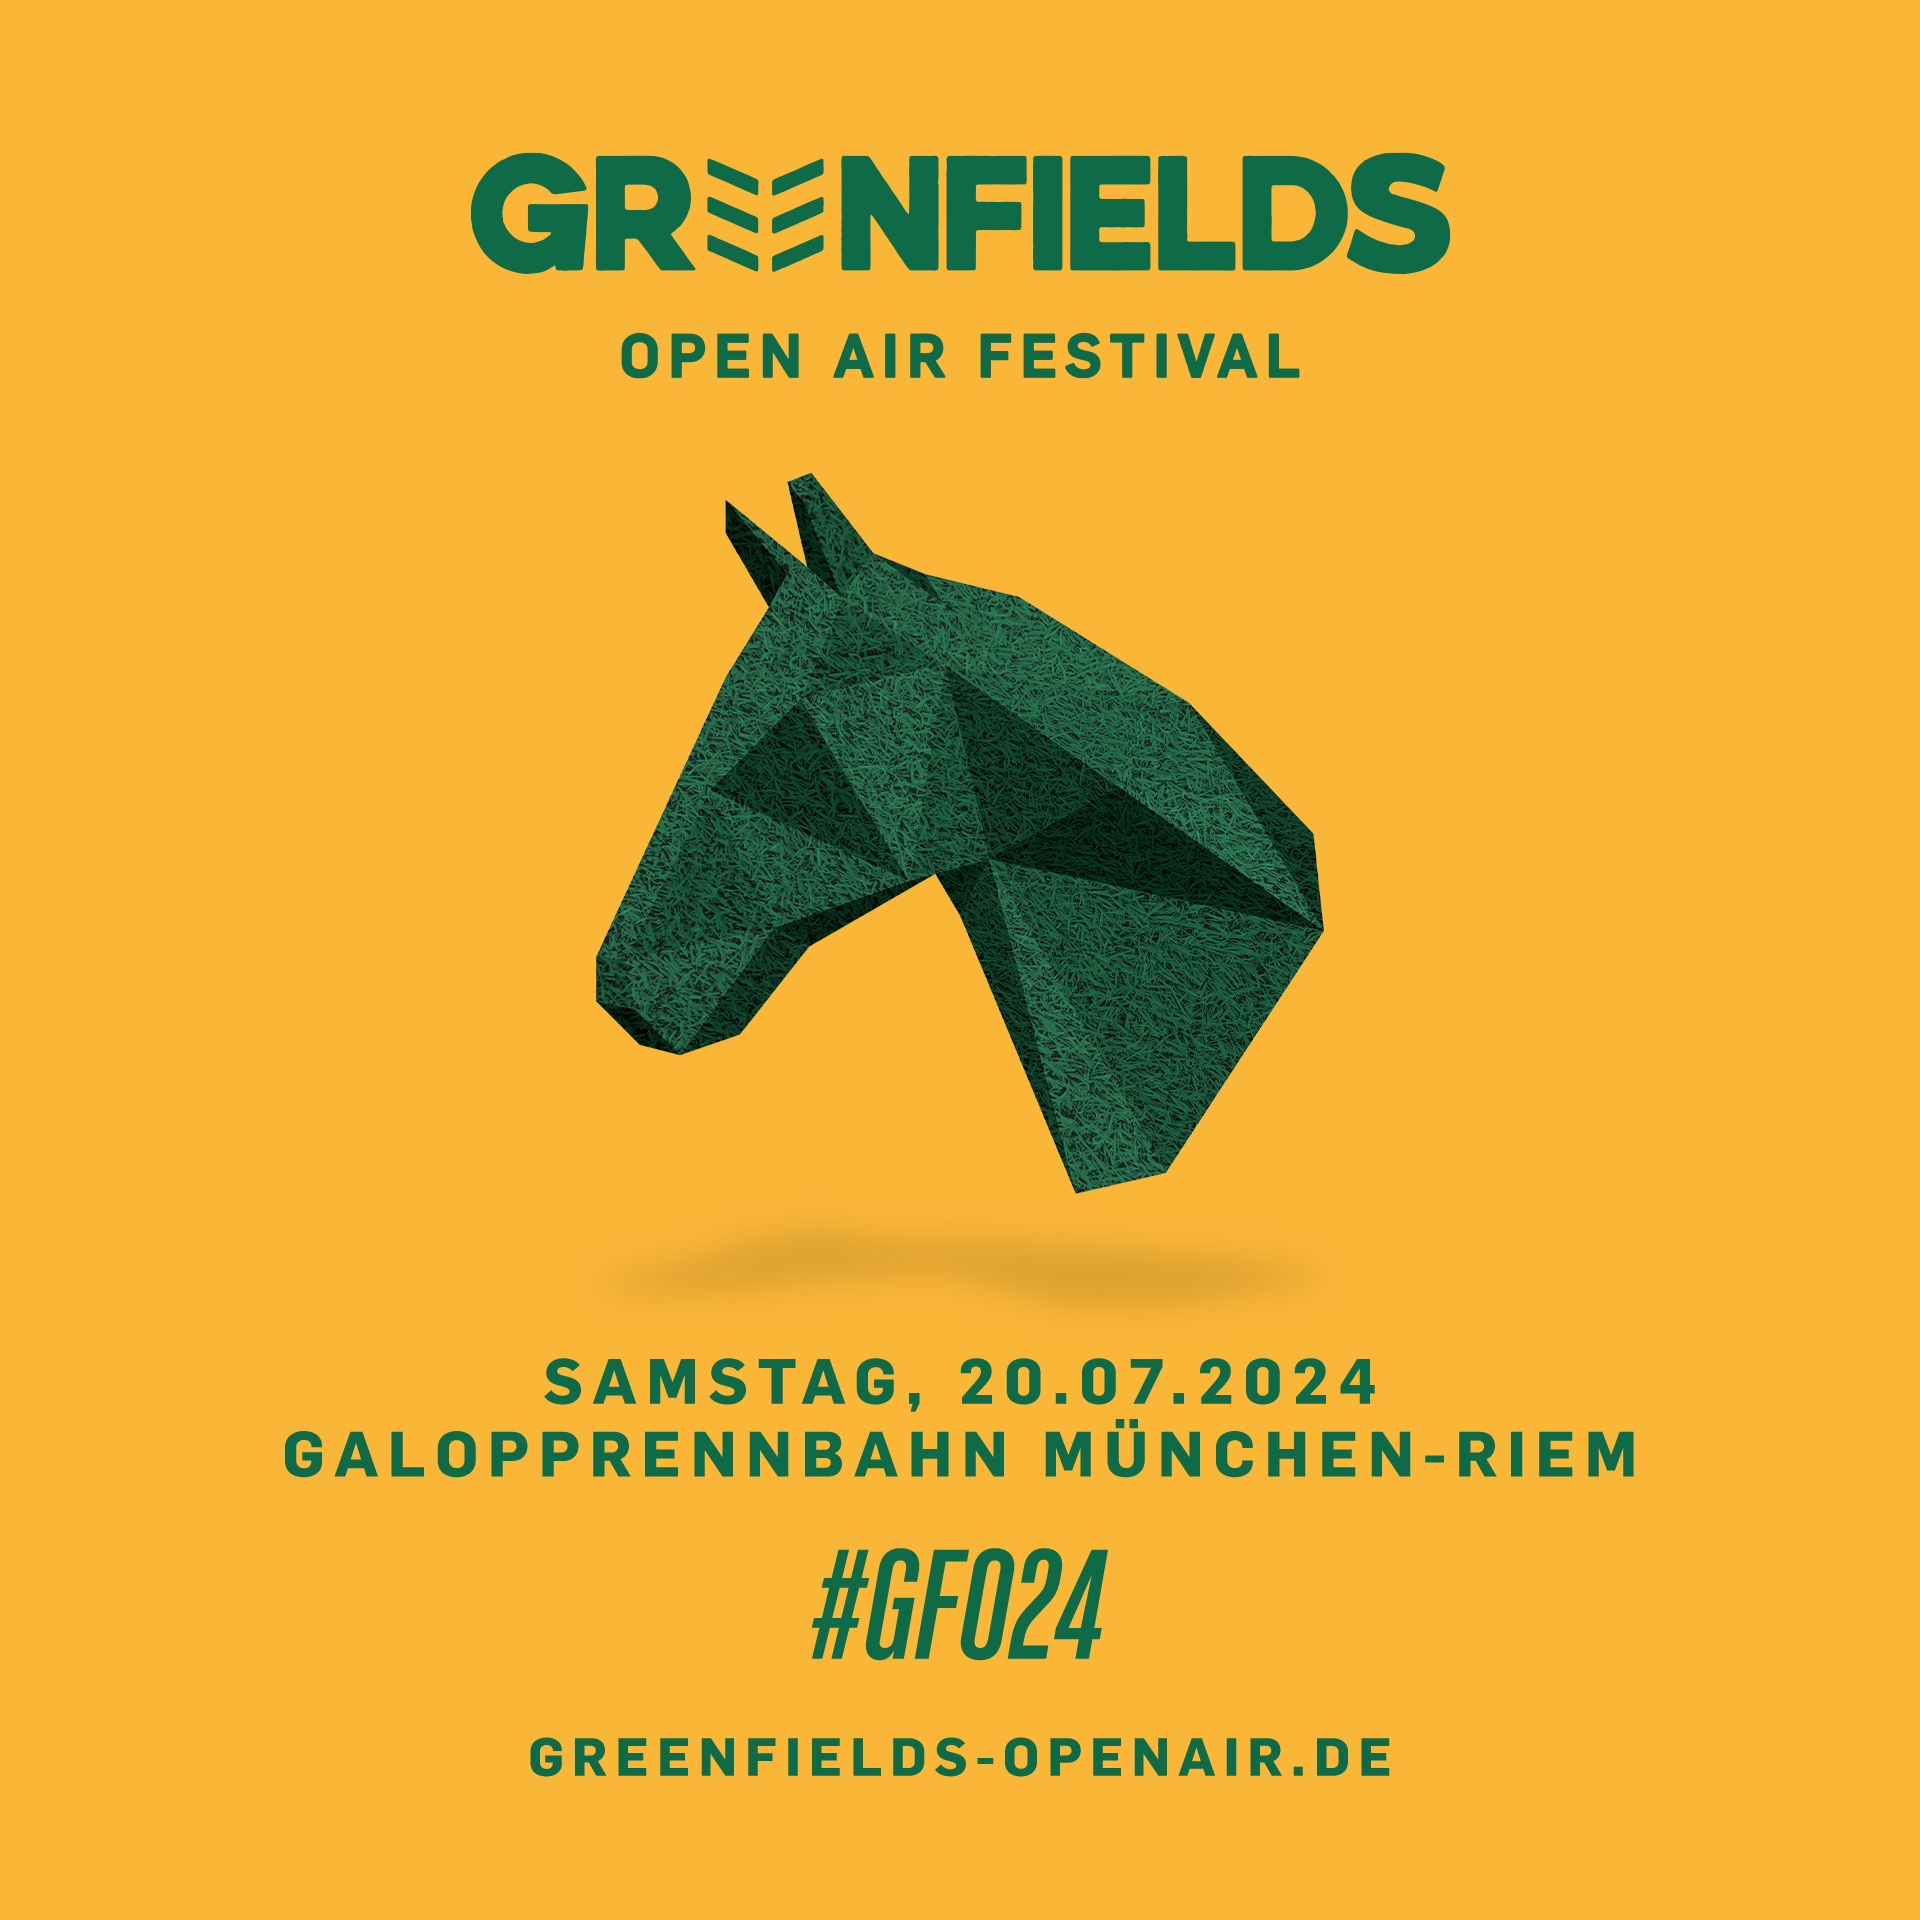 Greenfields Open Air Festival 2024 - フライヤー表